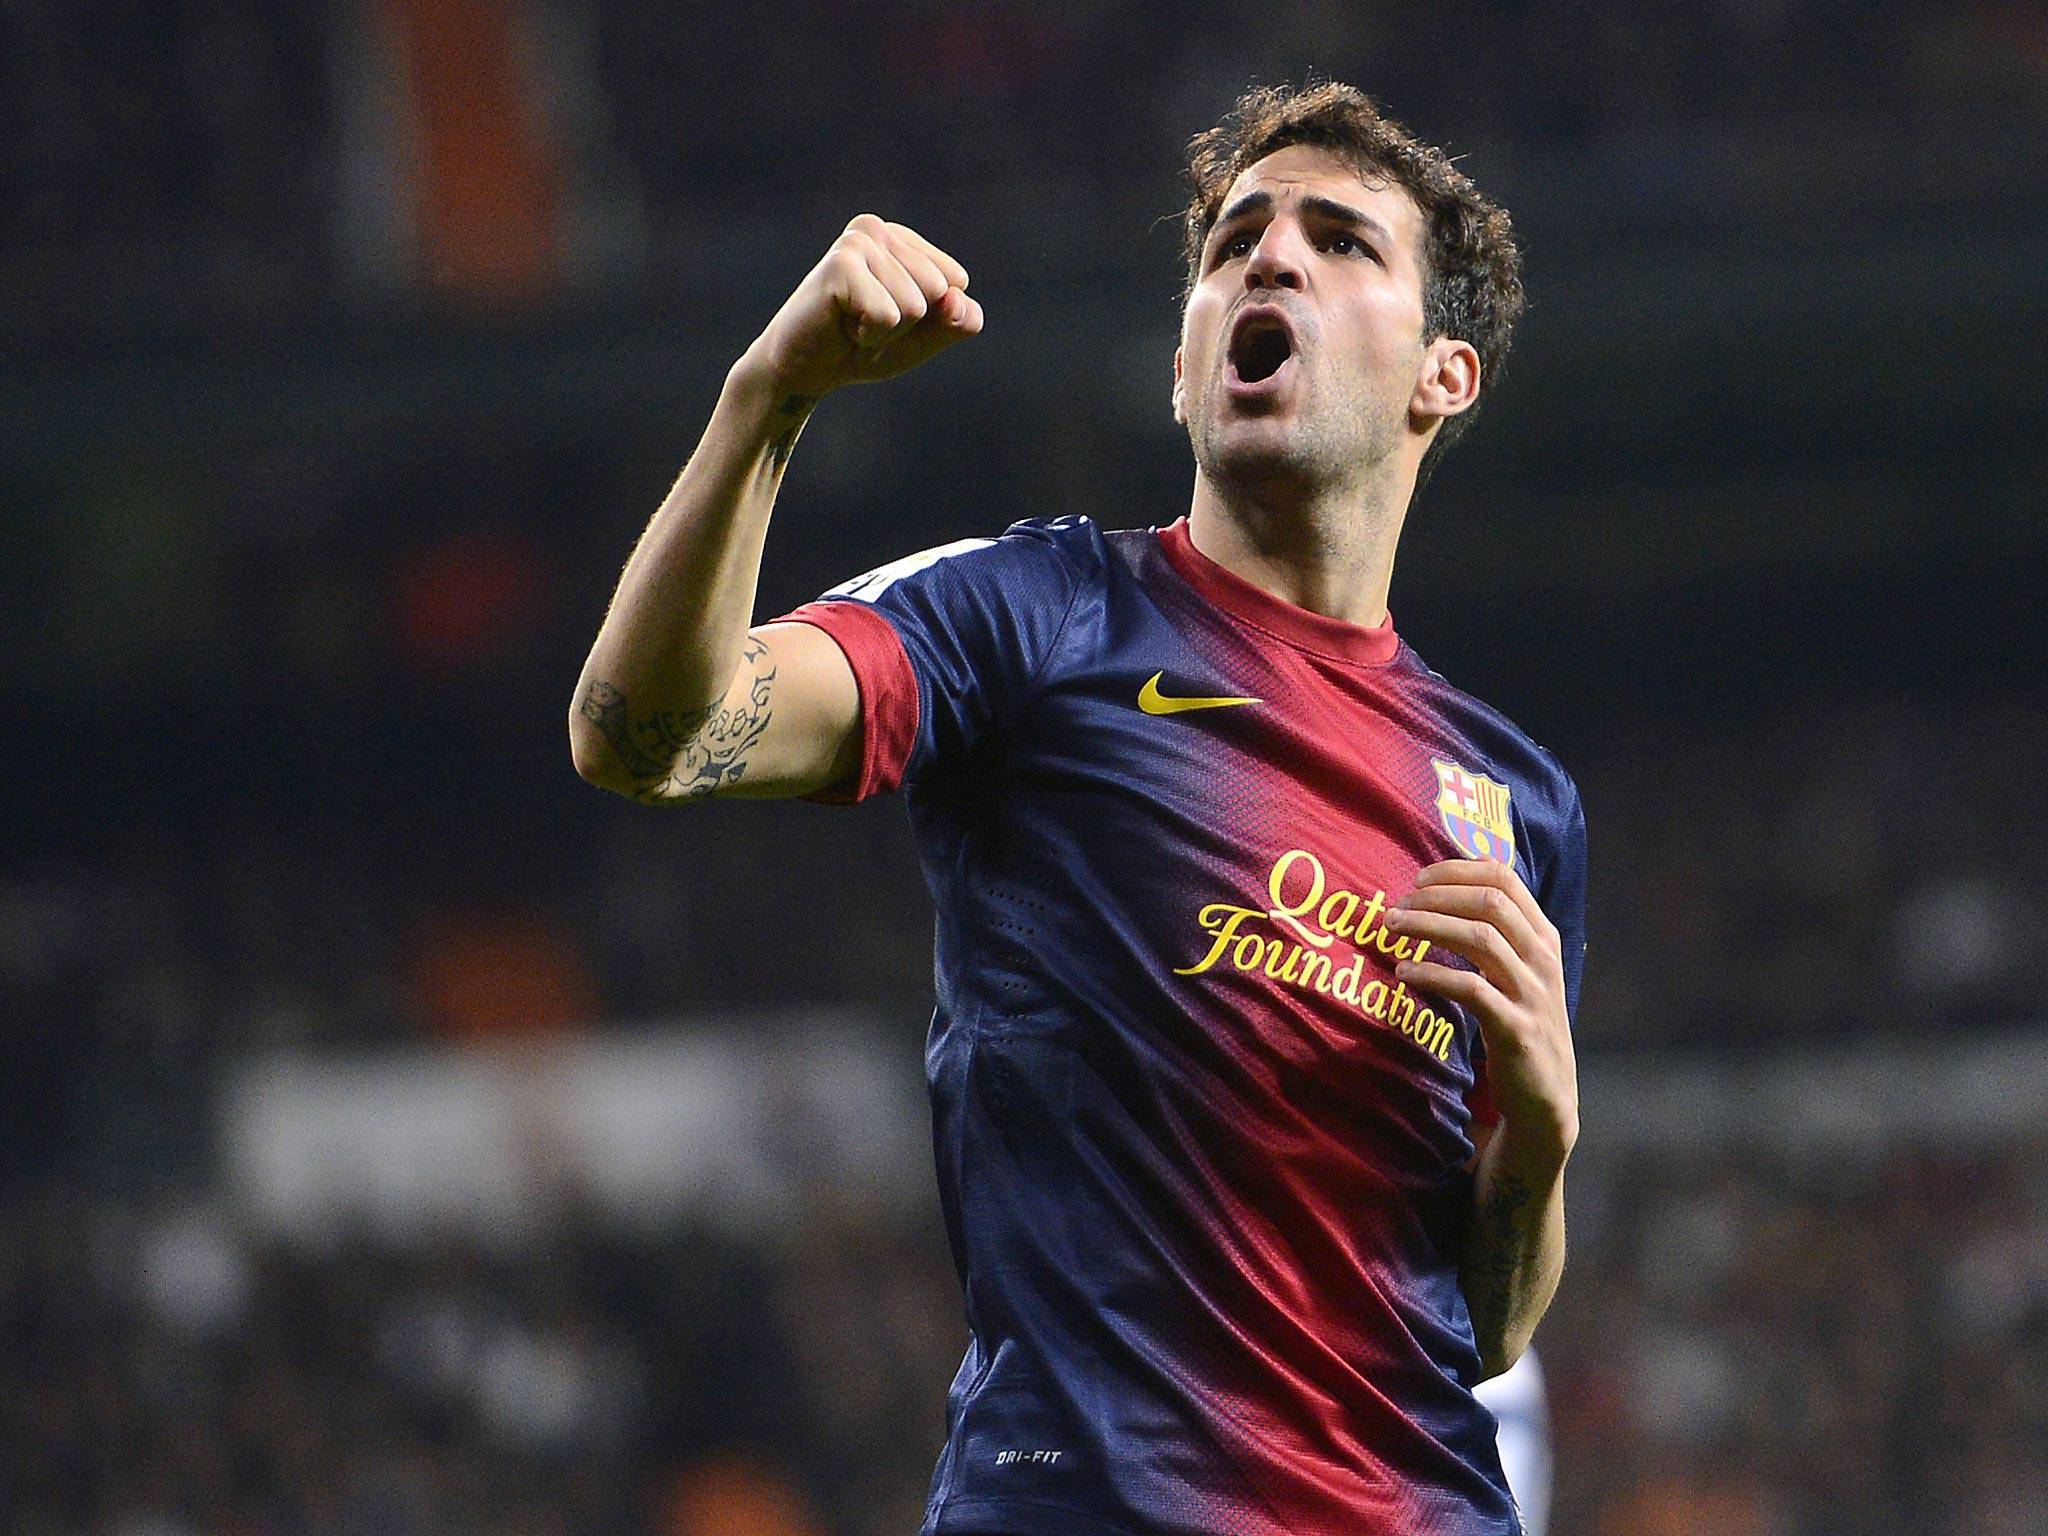  Francesc Fabregas won the game wallpapers and images  wallpapers